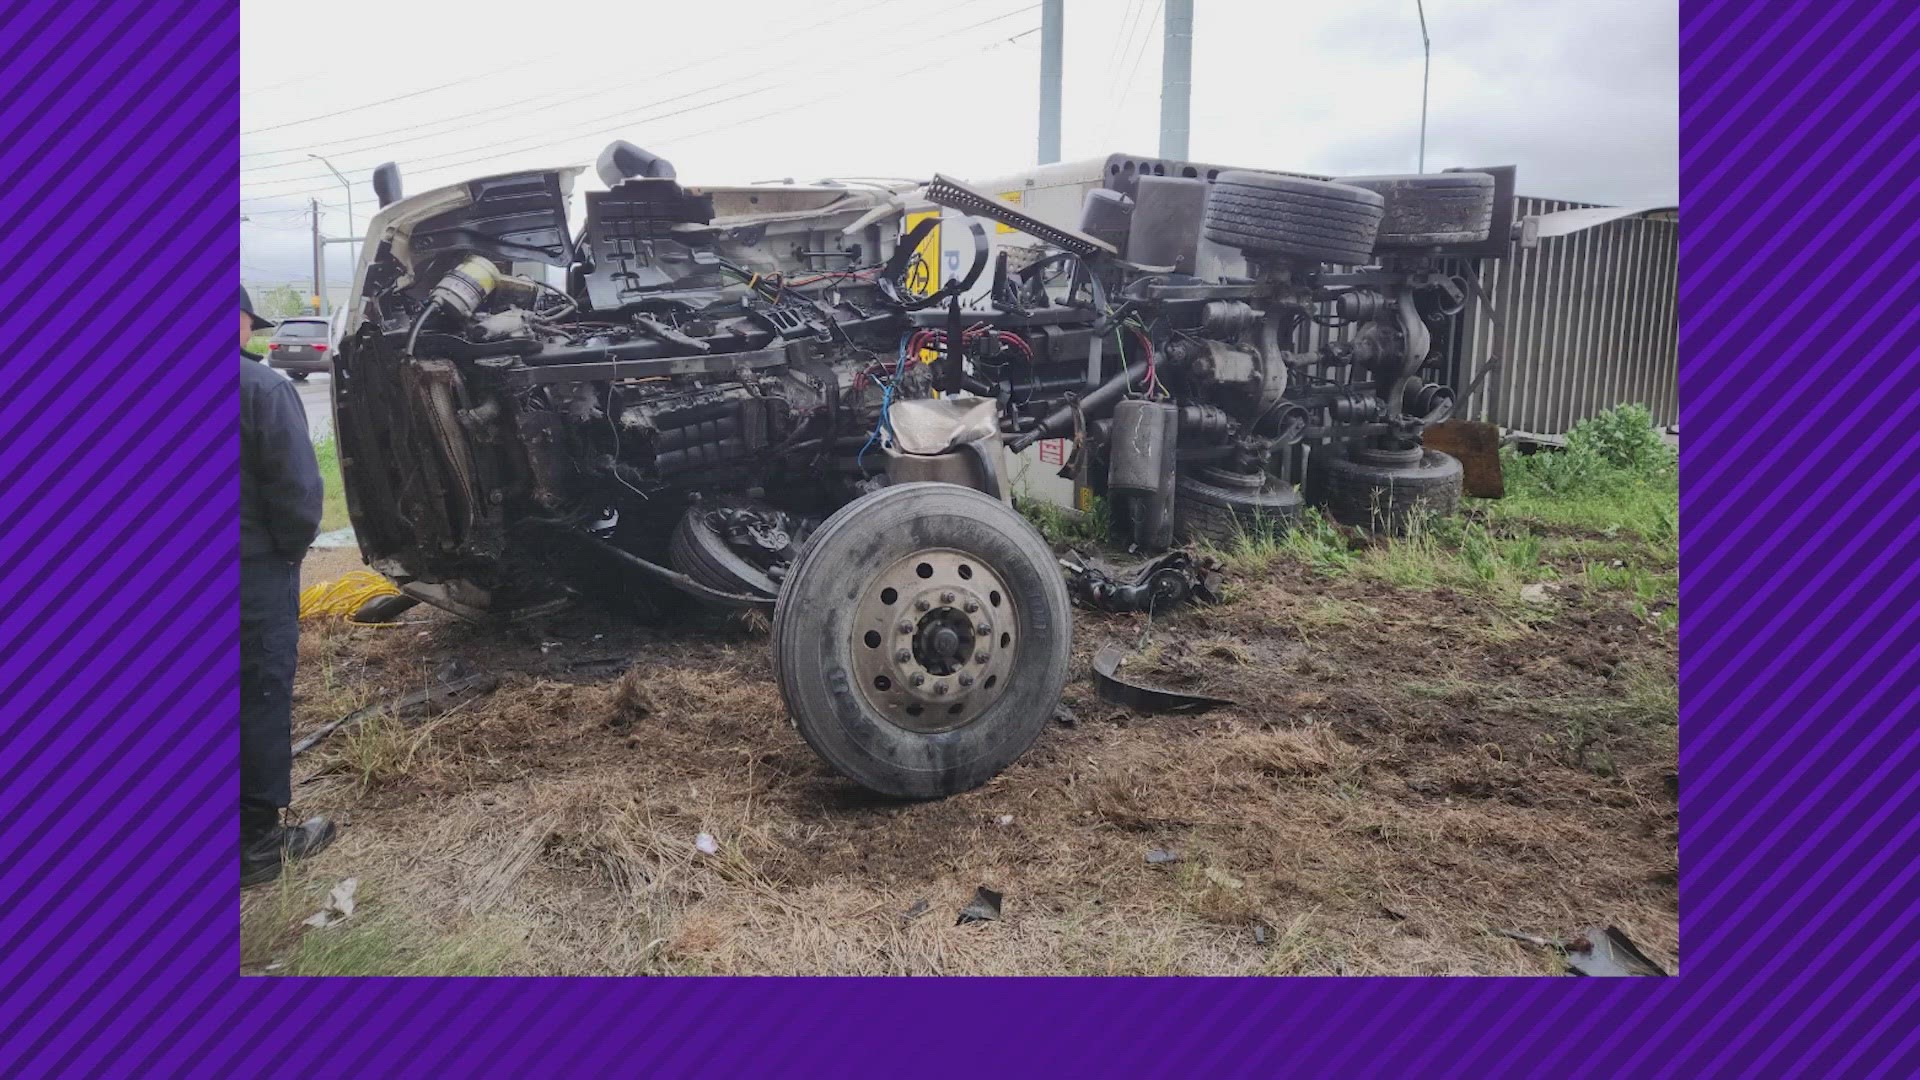 The accident happened at Highway 151 and Culebra around 10:35 a.m. The fire department said no other vehicles were involved.